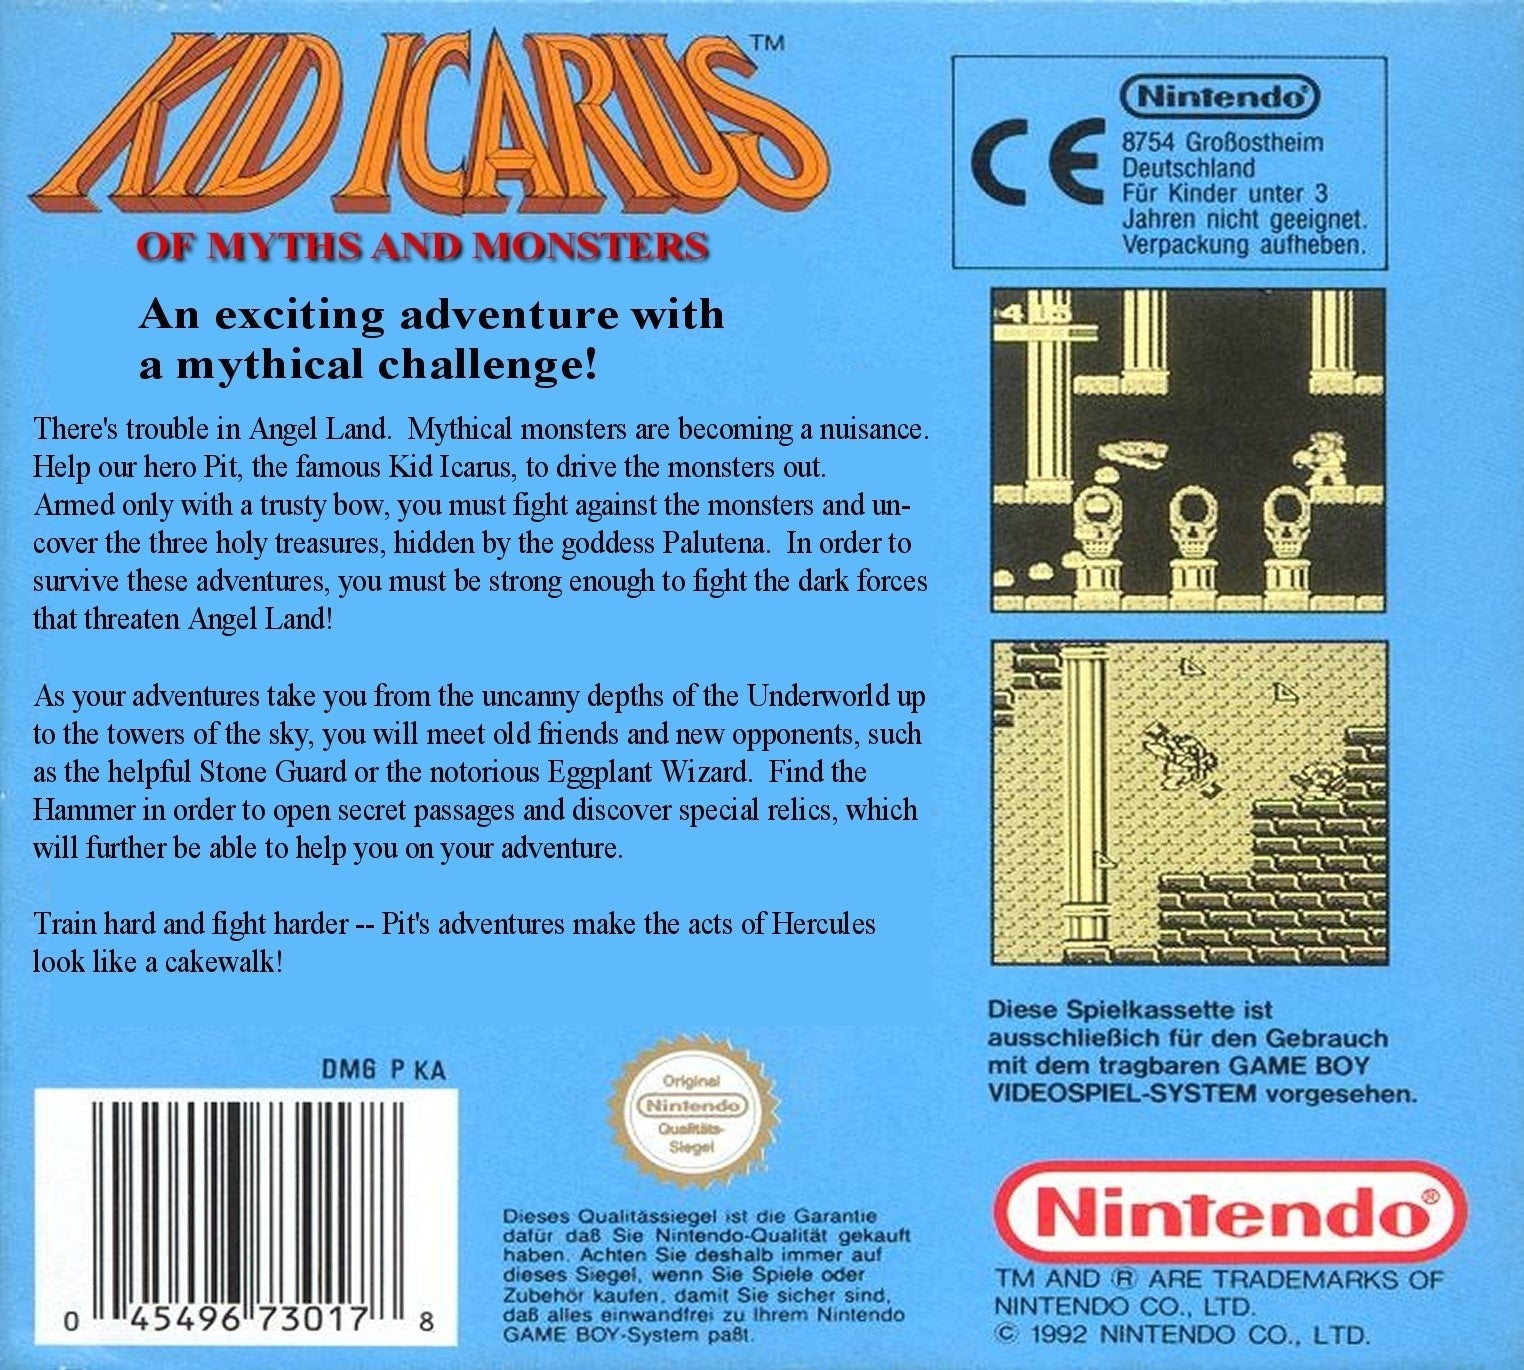 Kid Icarus of Myths and Monsters